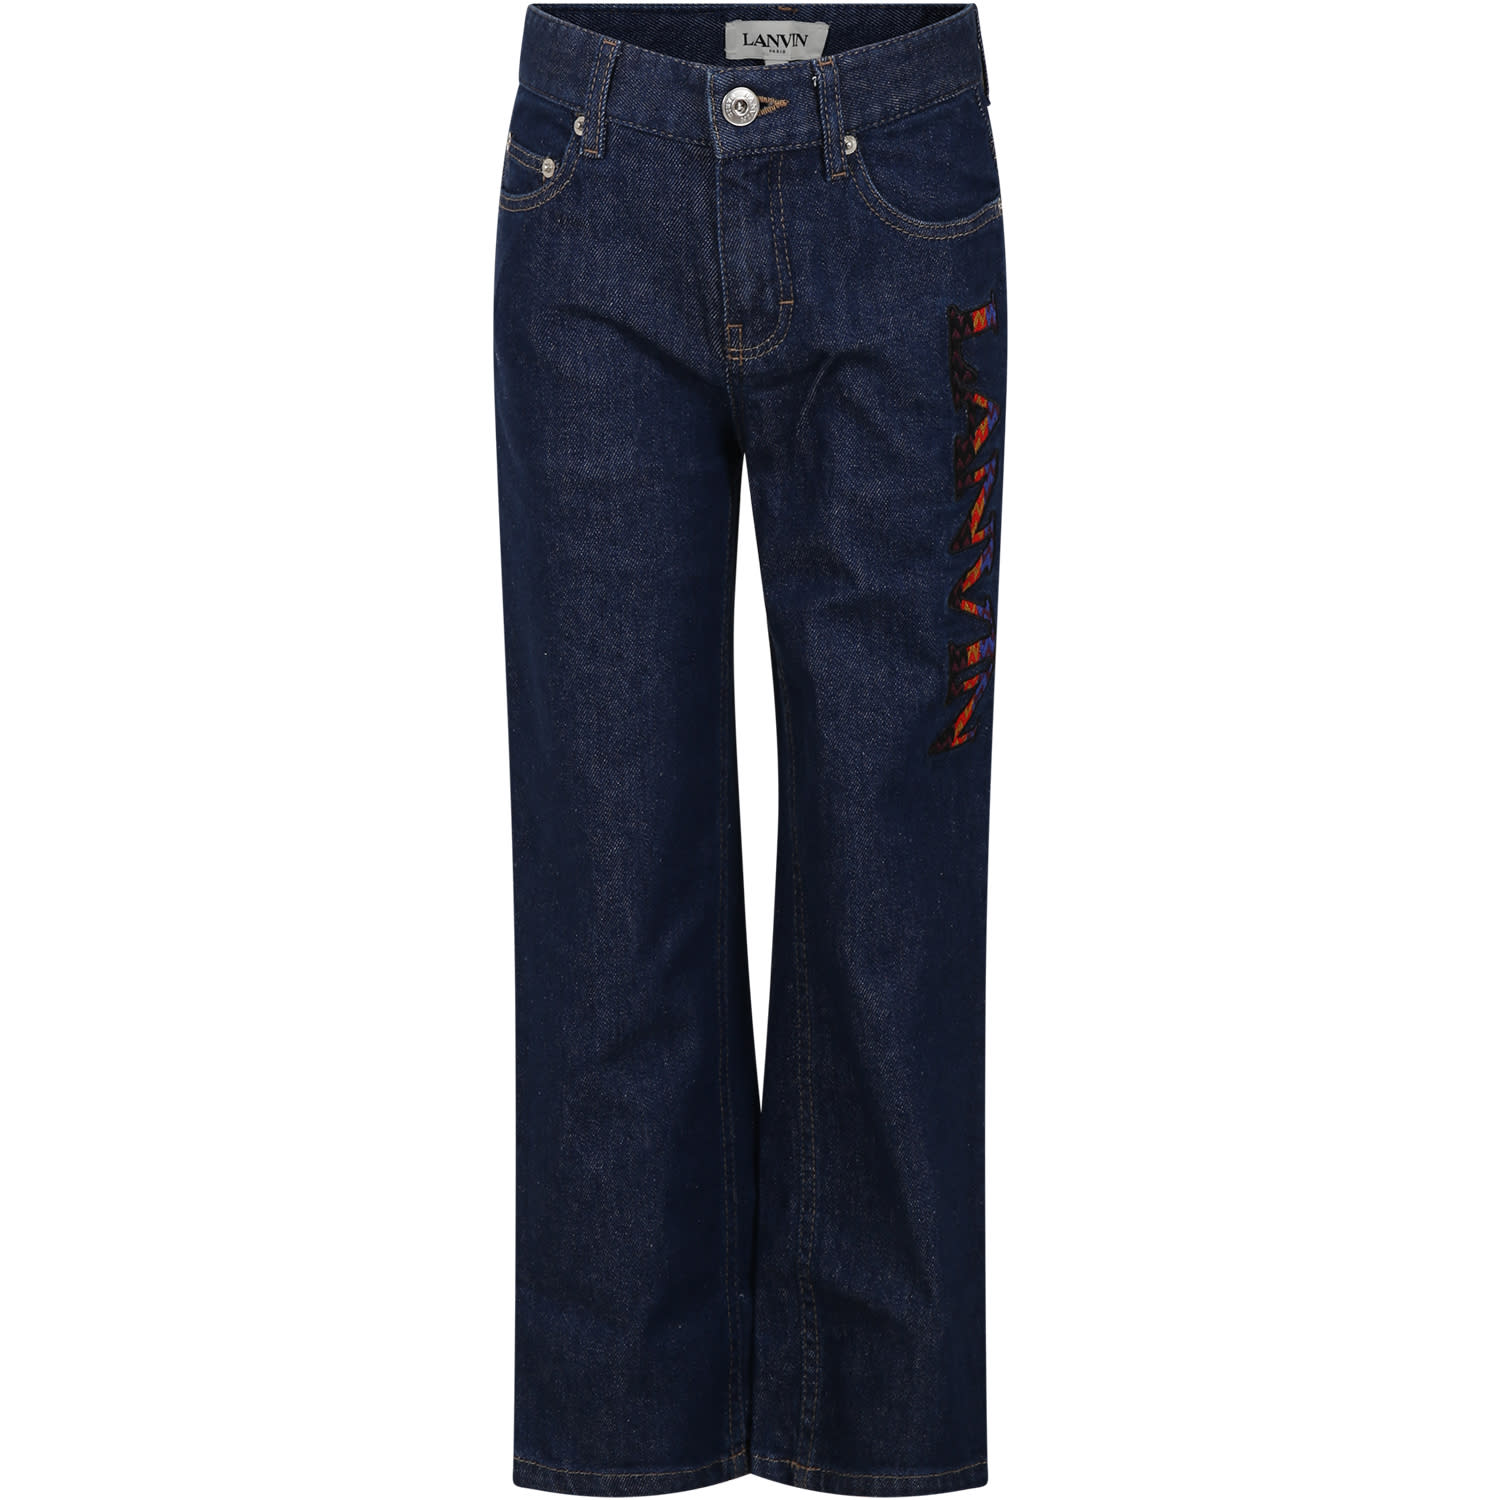 LANVIN LIGHT-BLUE JEANS FOR BOY WITH EMBROIDERED LOGO